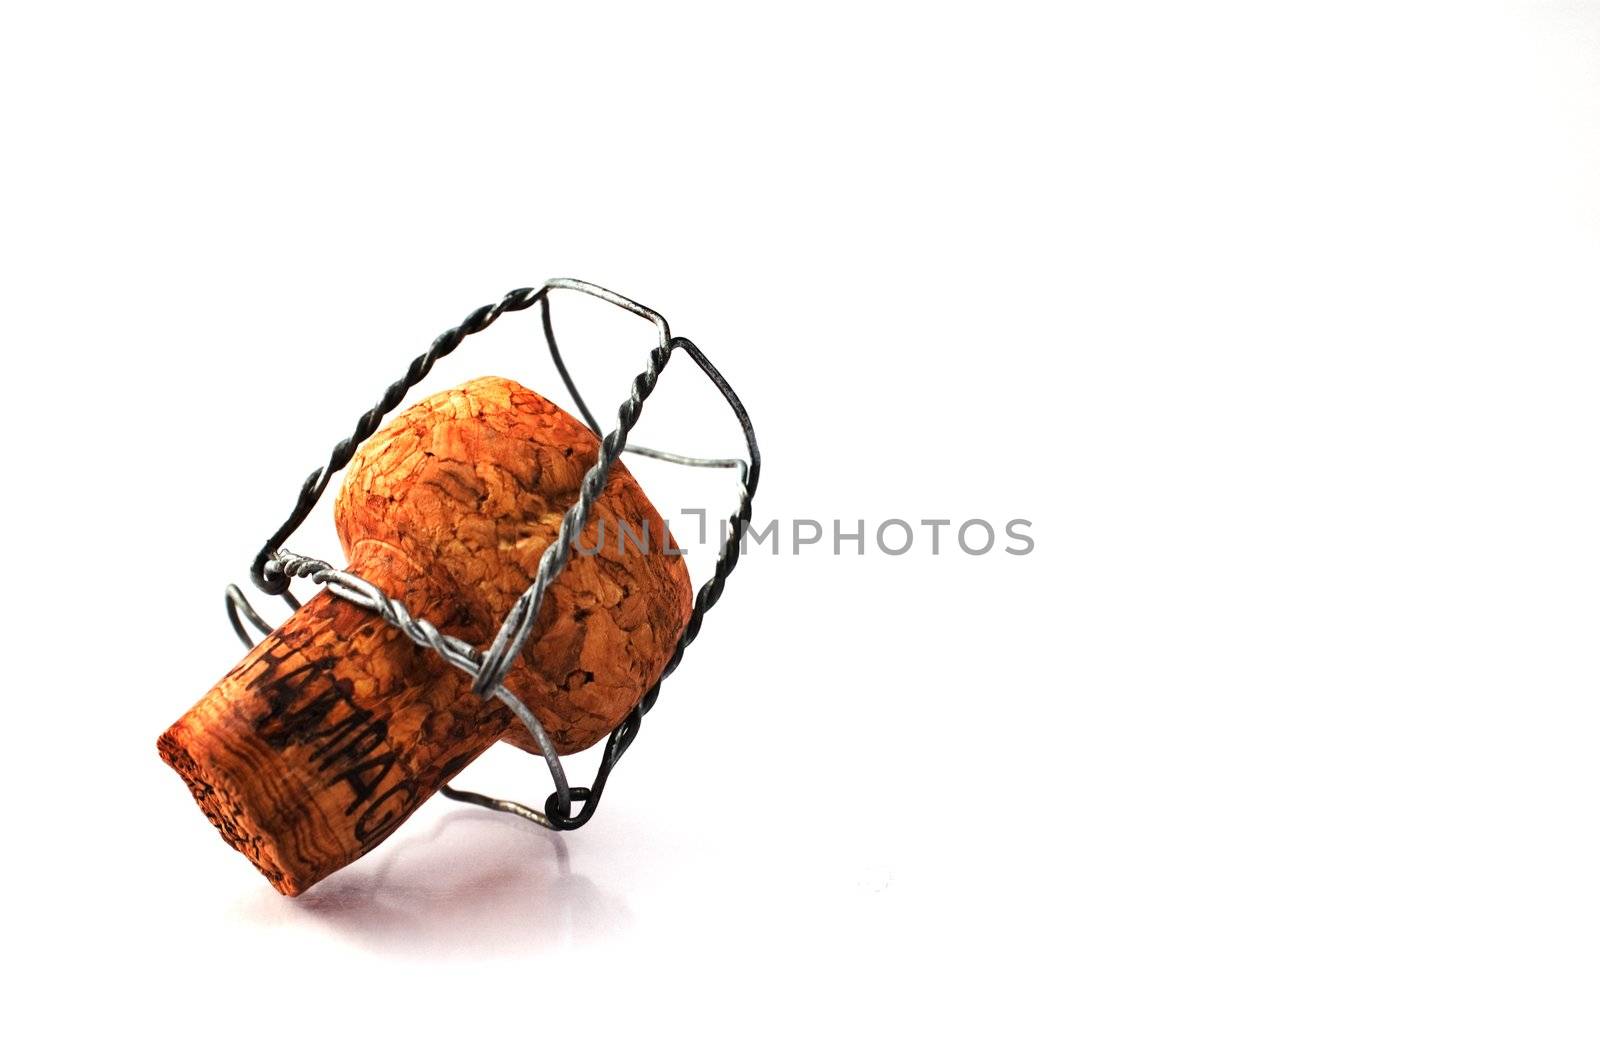 Champagne cork by sil